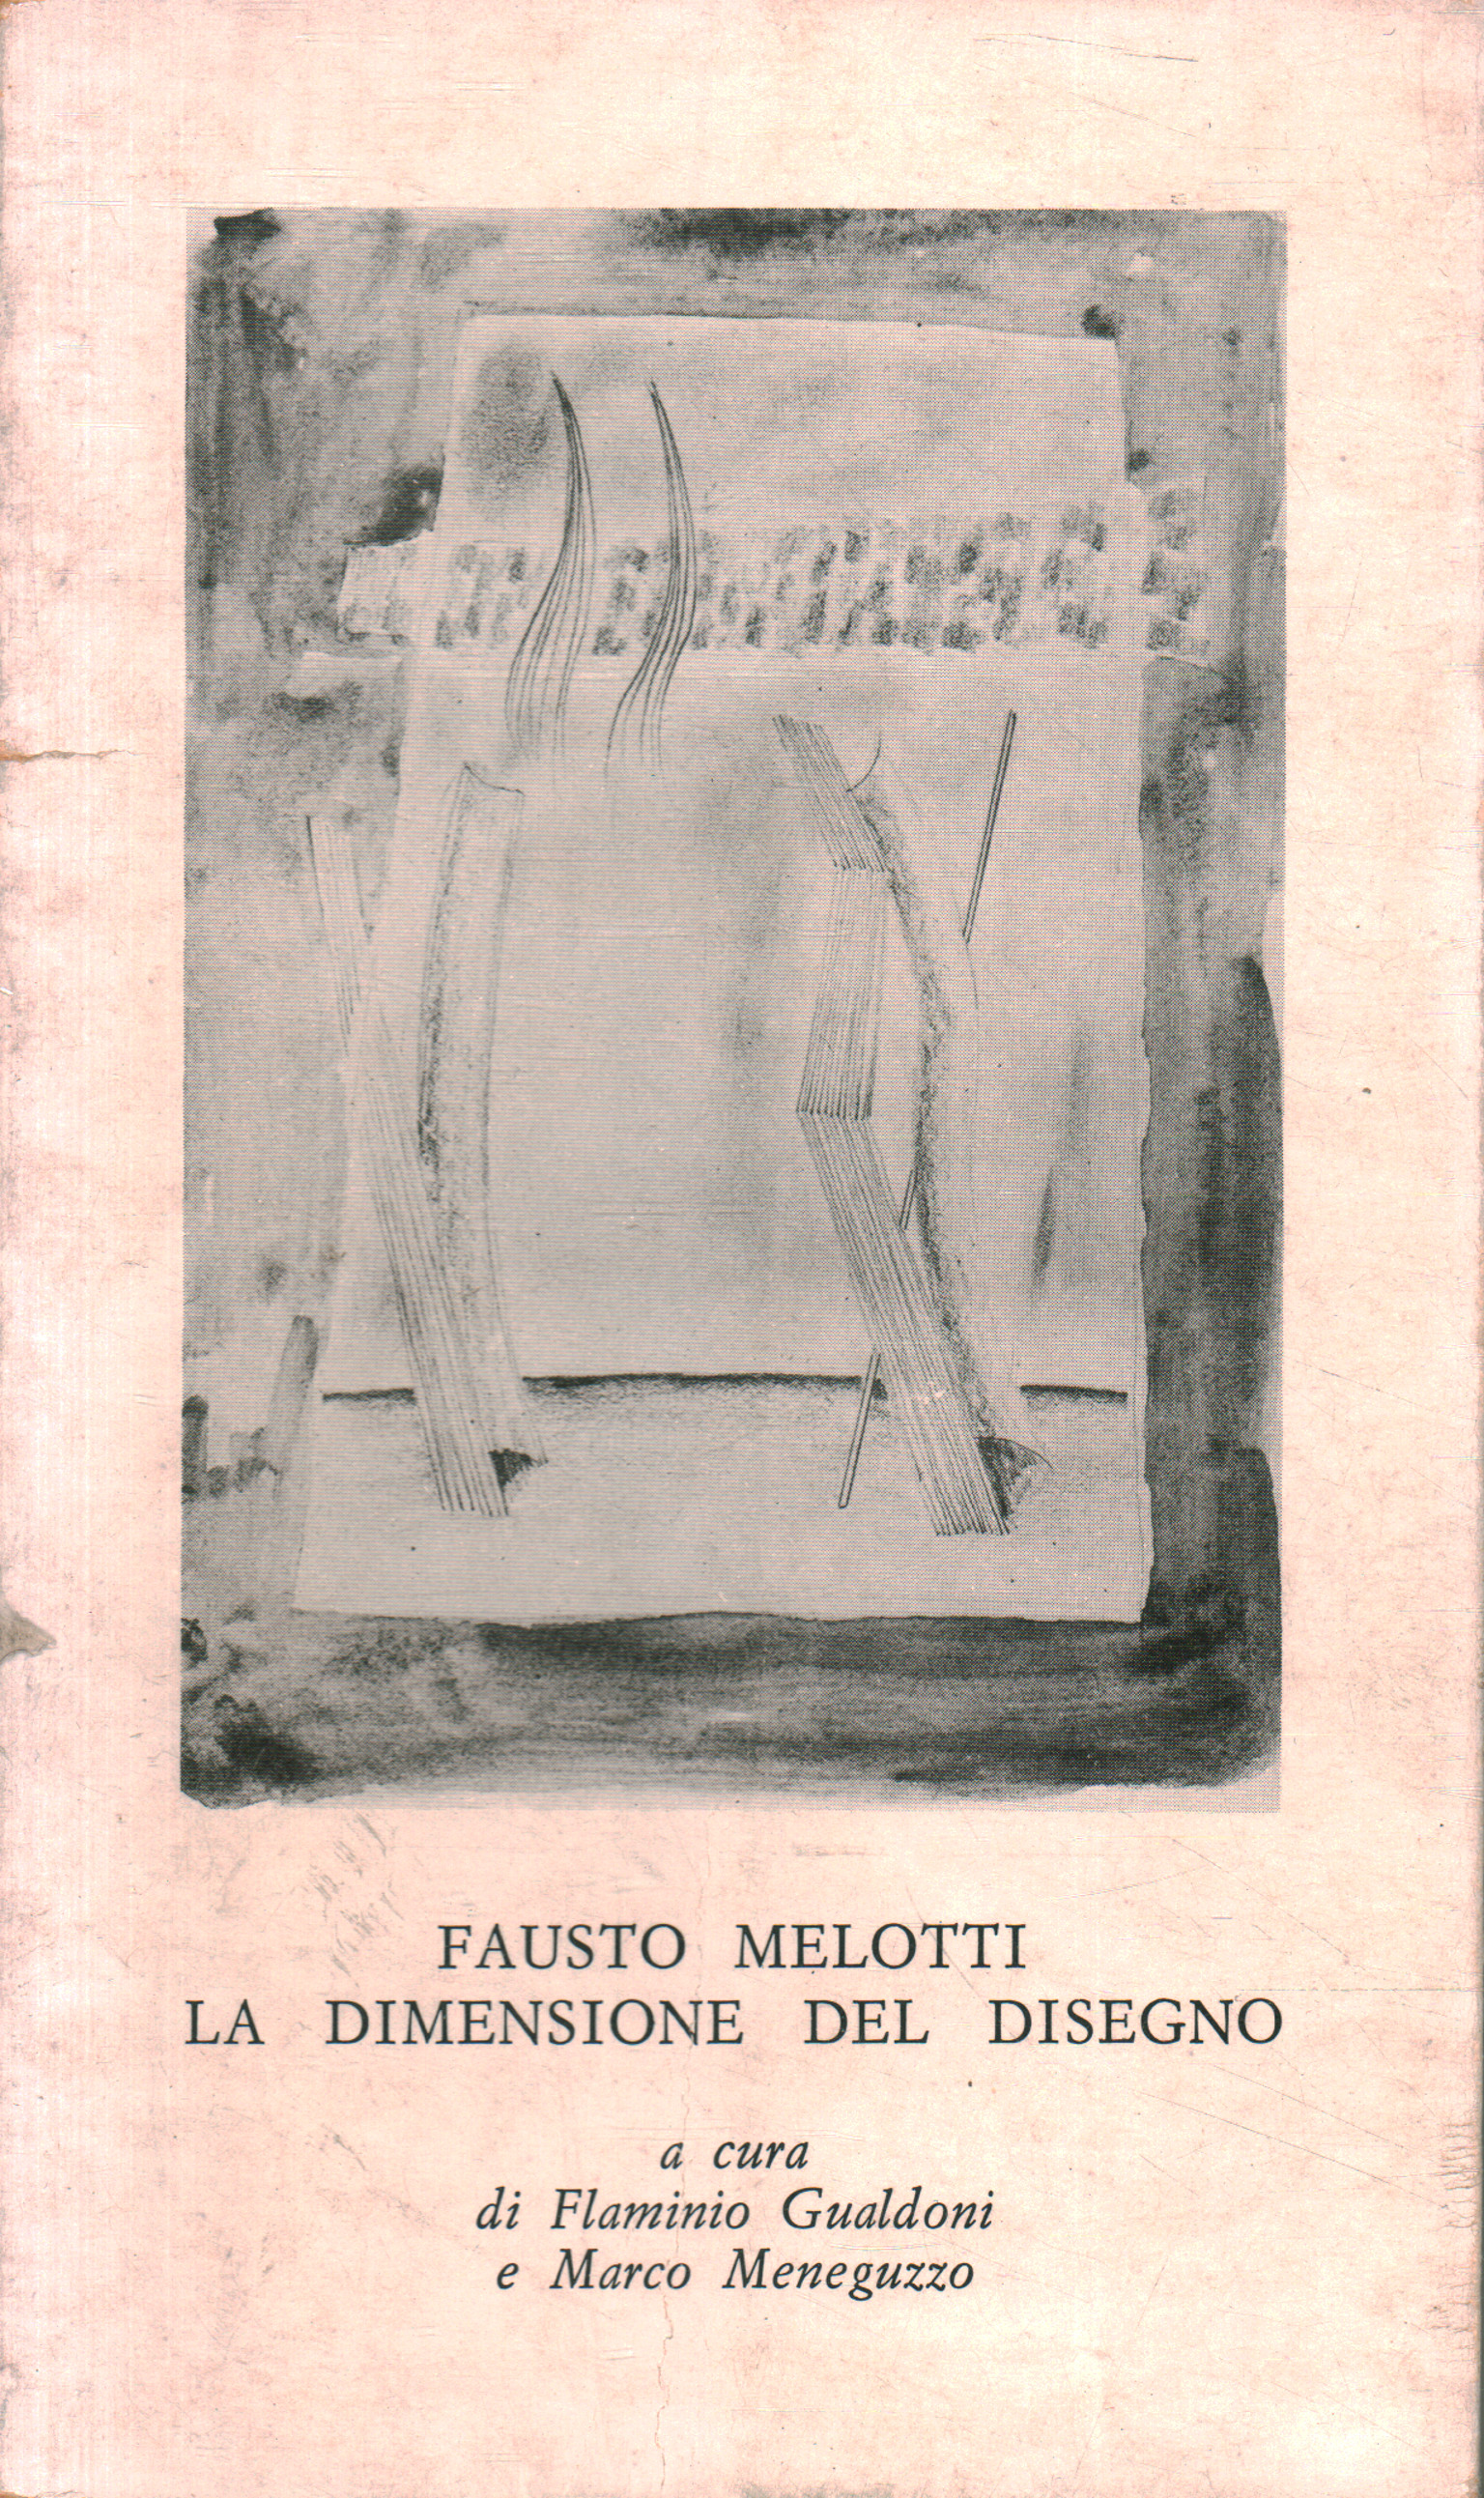 Fausto Melotti. The size of the drawing